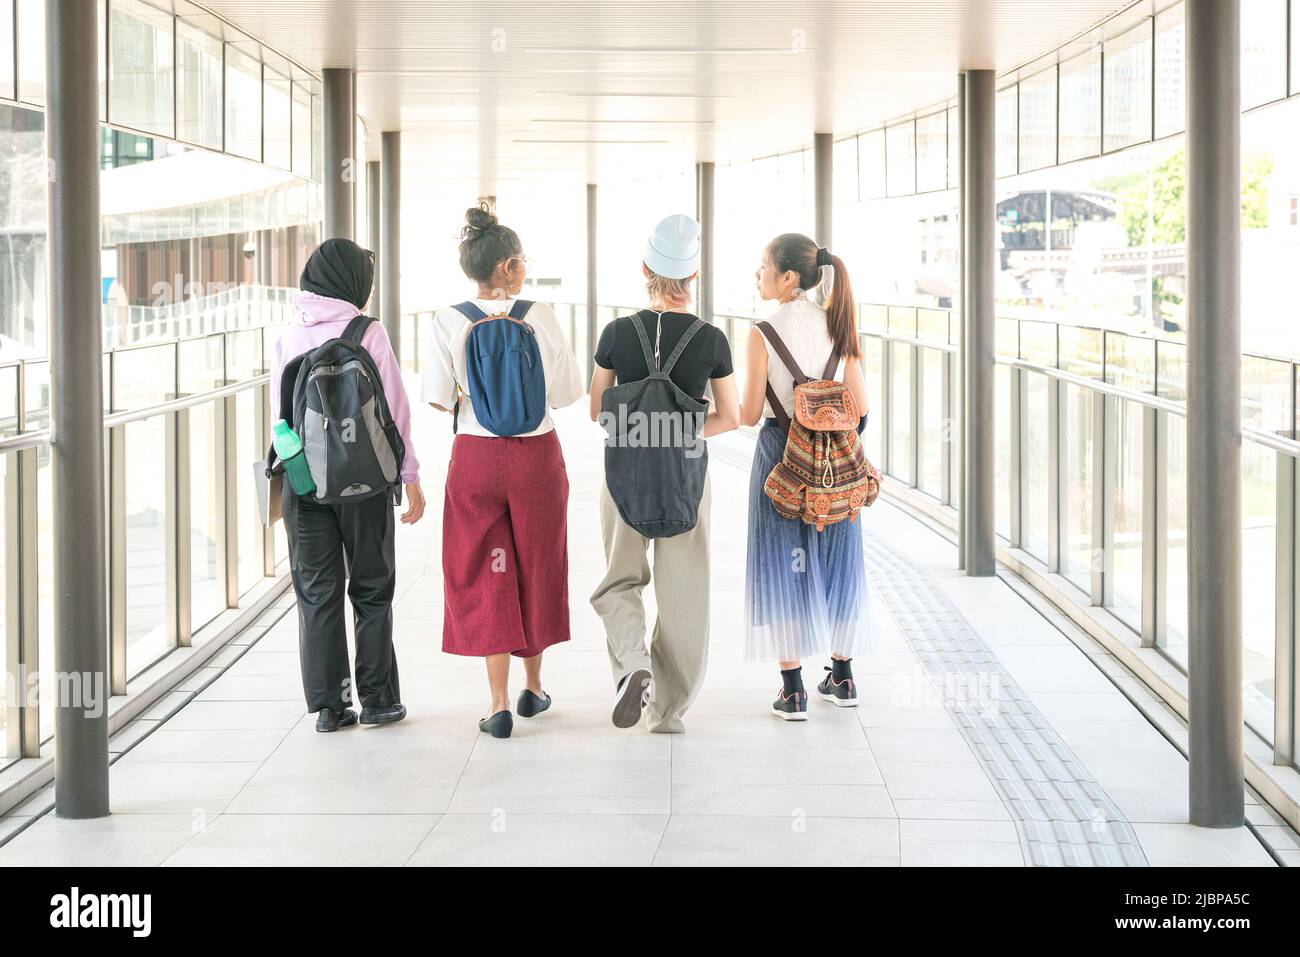 Group of multi-racial college student friends walking together in hall. Back view. Stock Photo